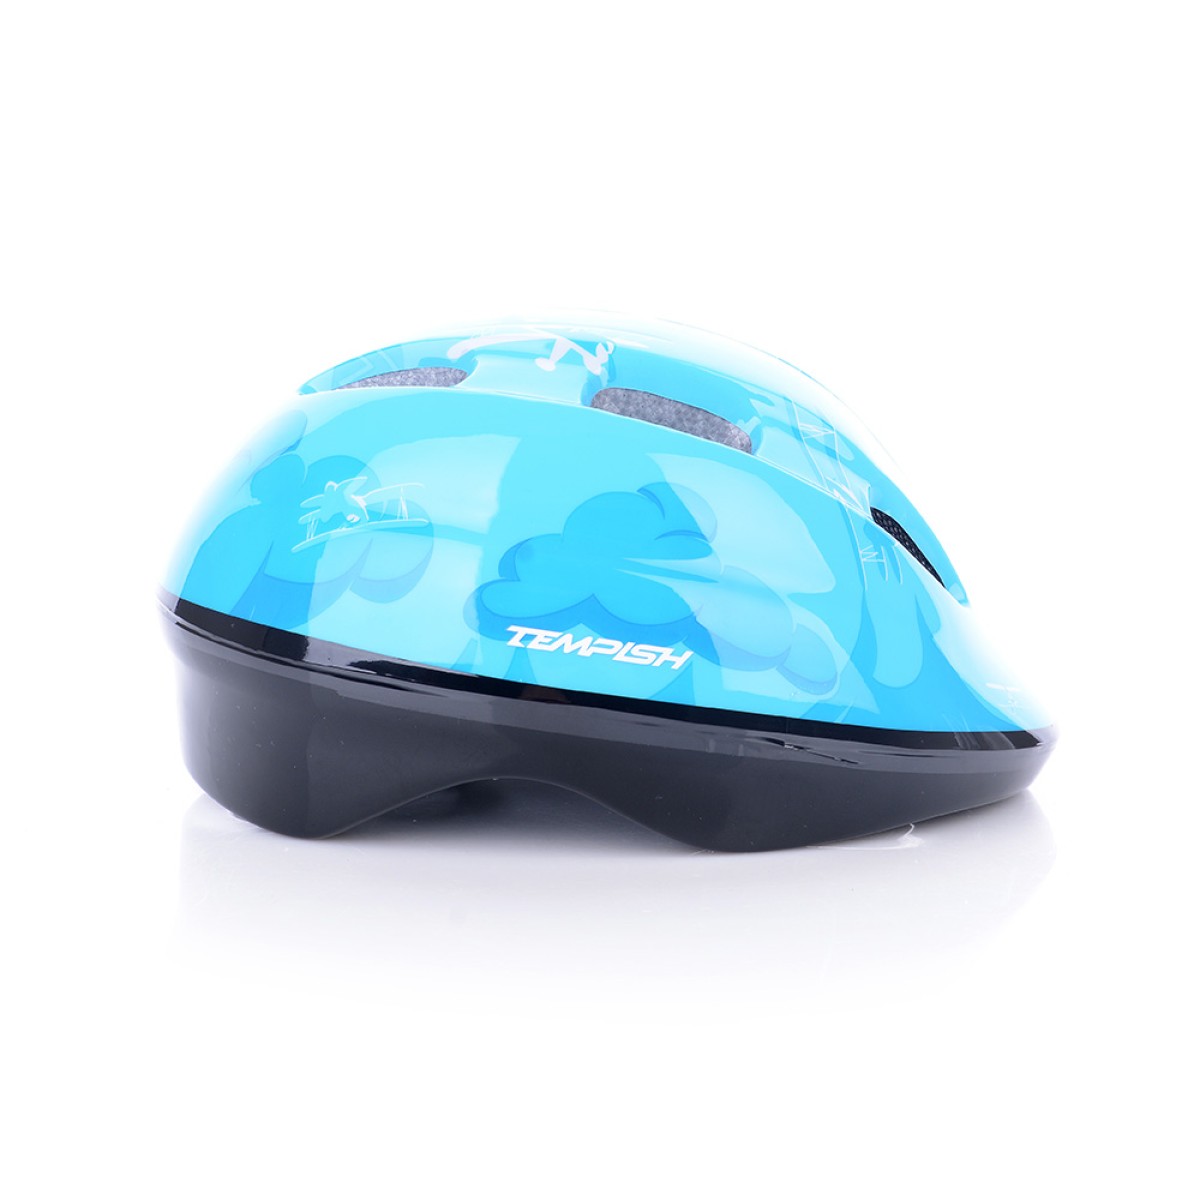 RAYBOW helmet for boards, skates or bicycles blue TEMPISH - view 2